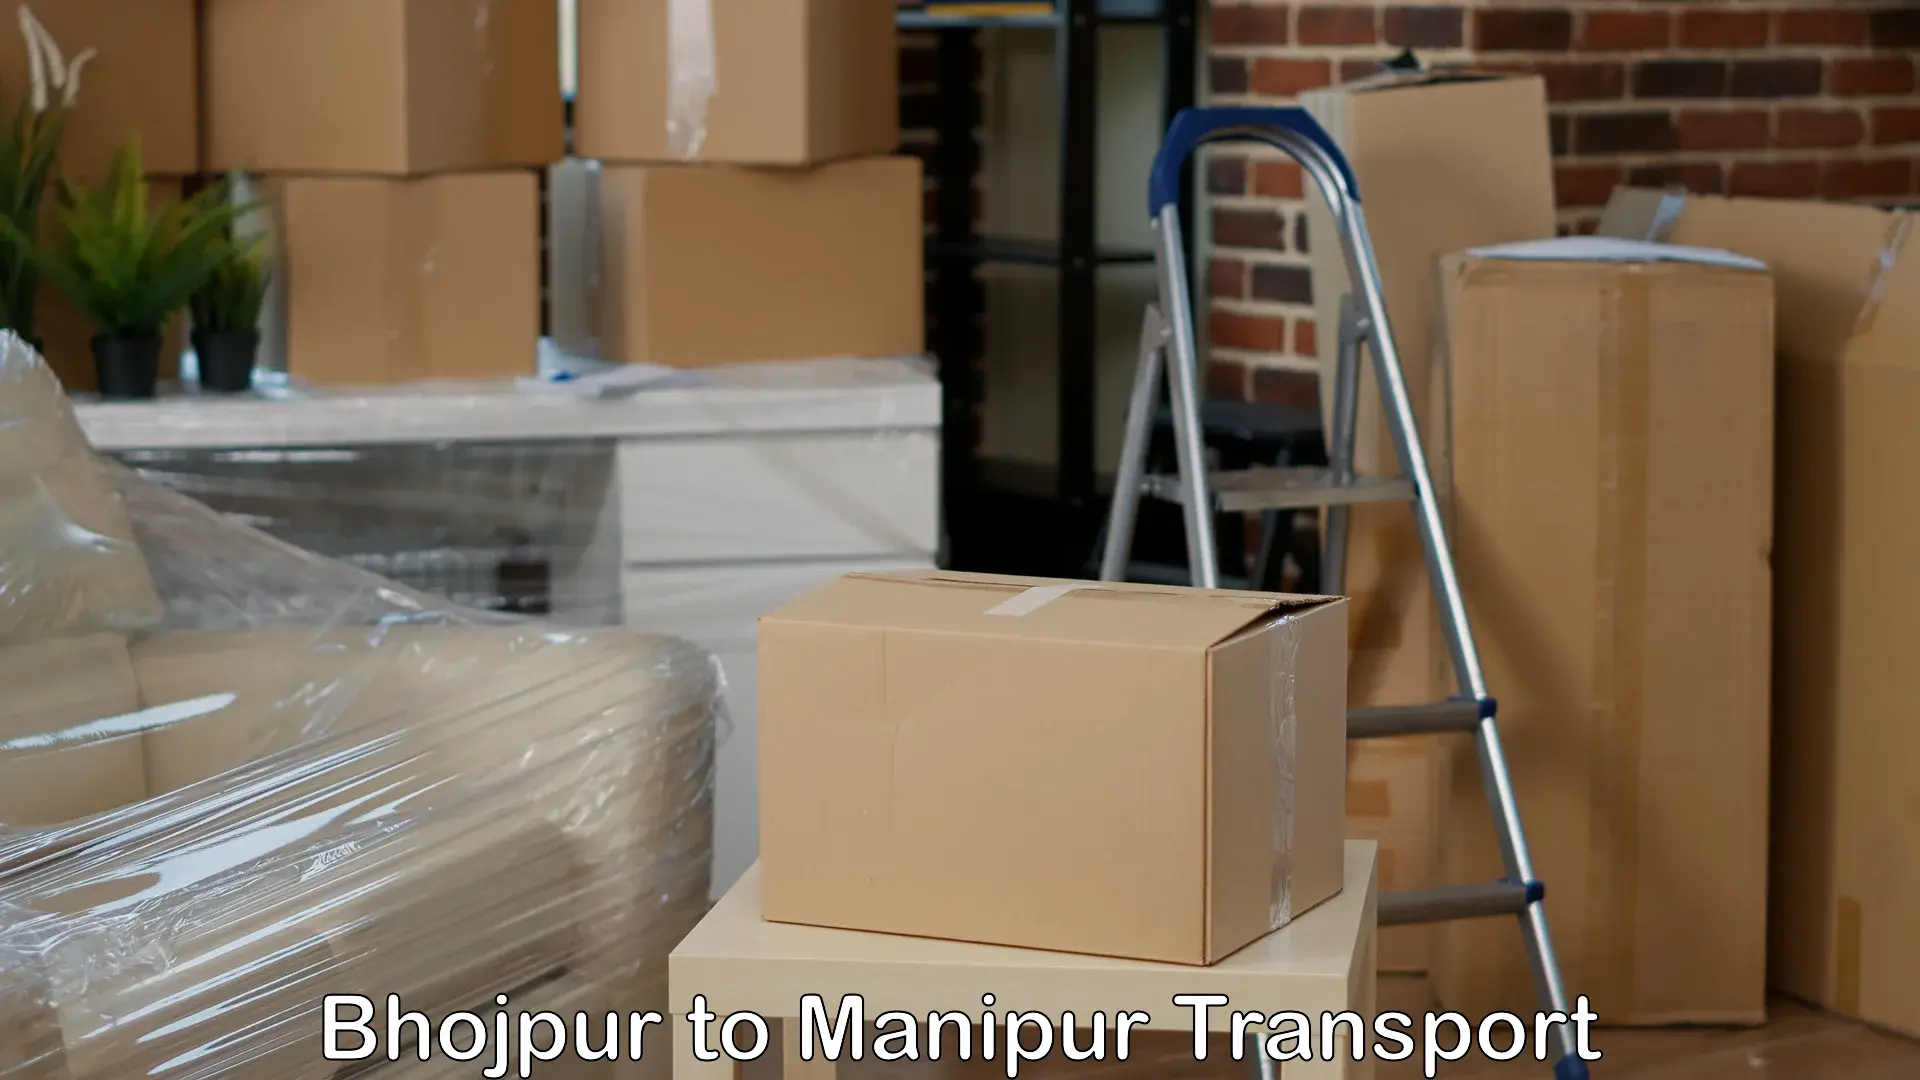 Pick up transport service Bhojpur to Manipur